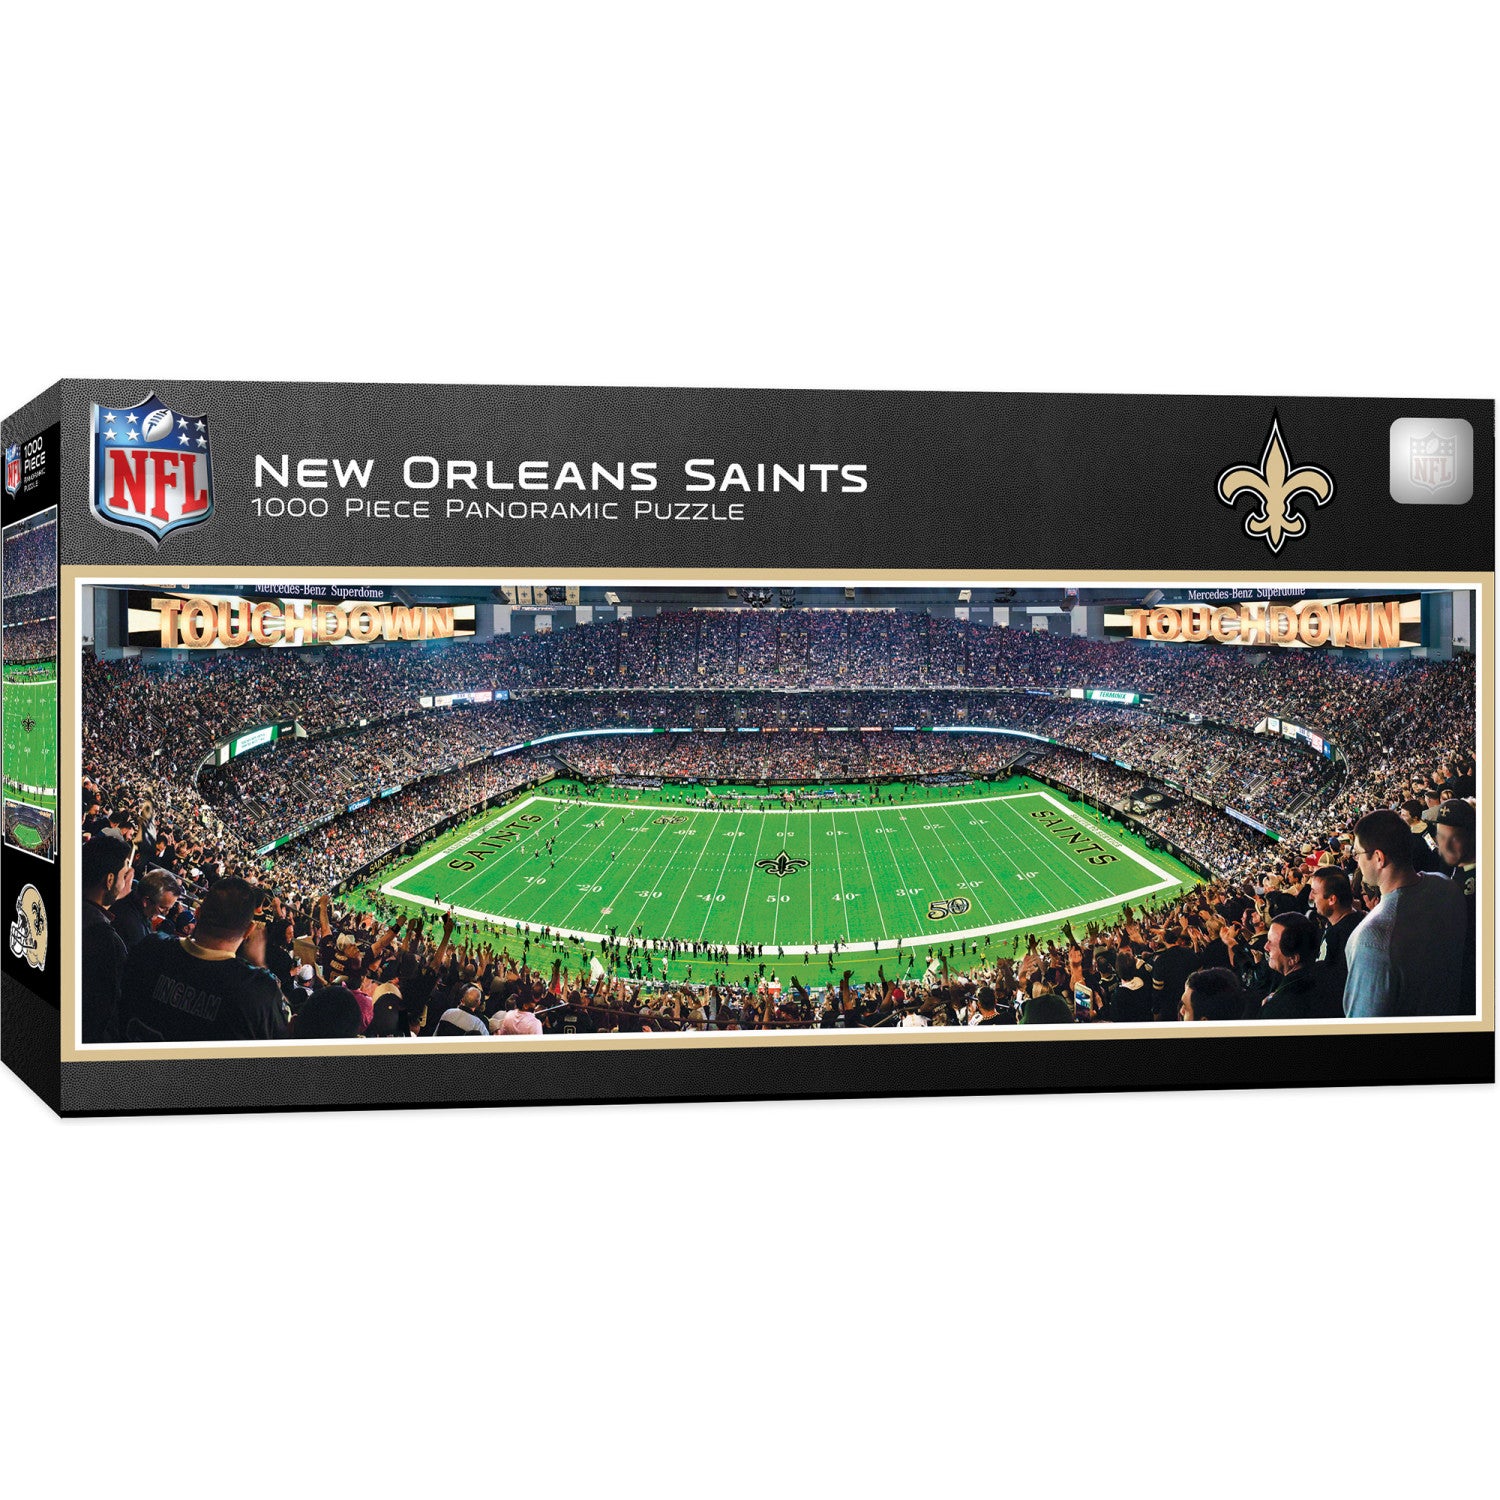 New Orleans Saints - 1000 Piece Panoramic Jigsaw Puzzle